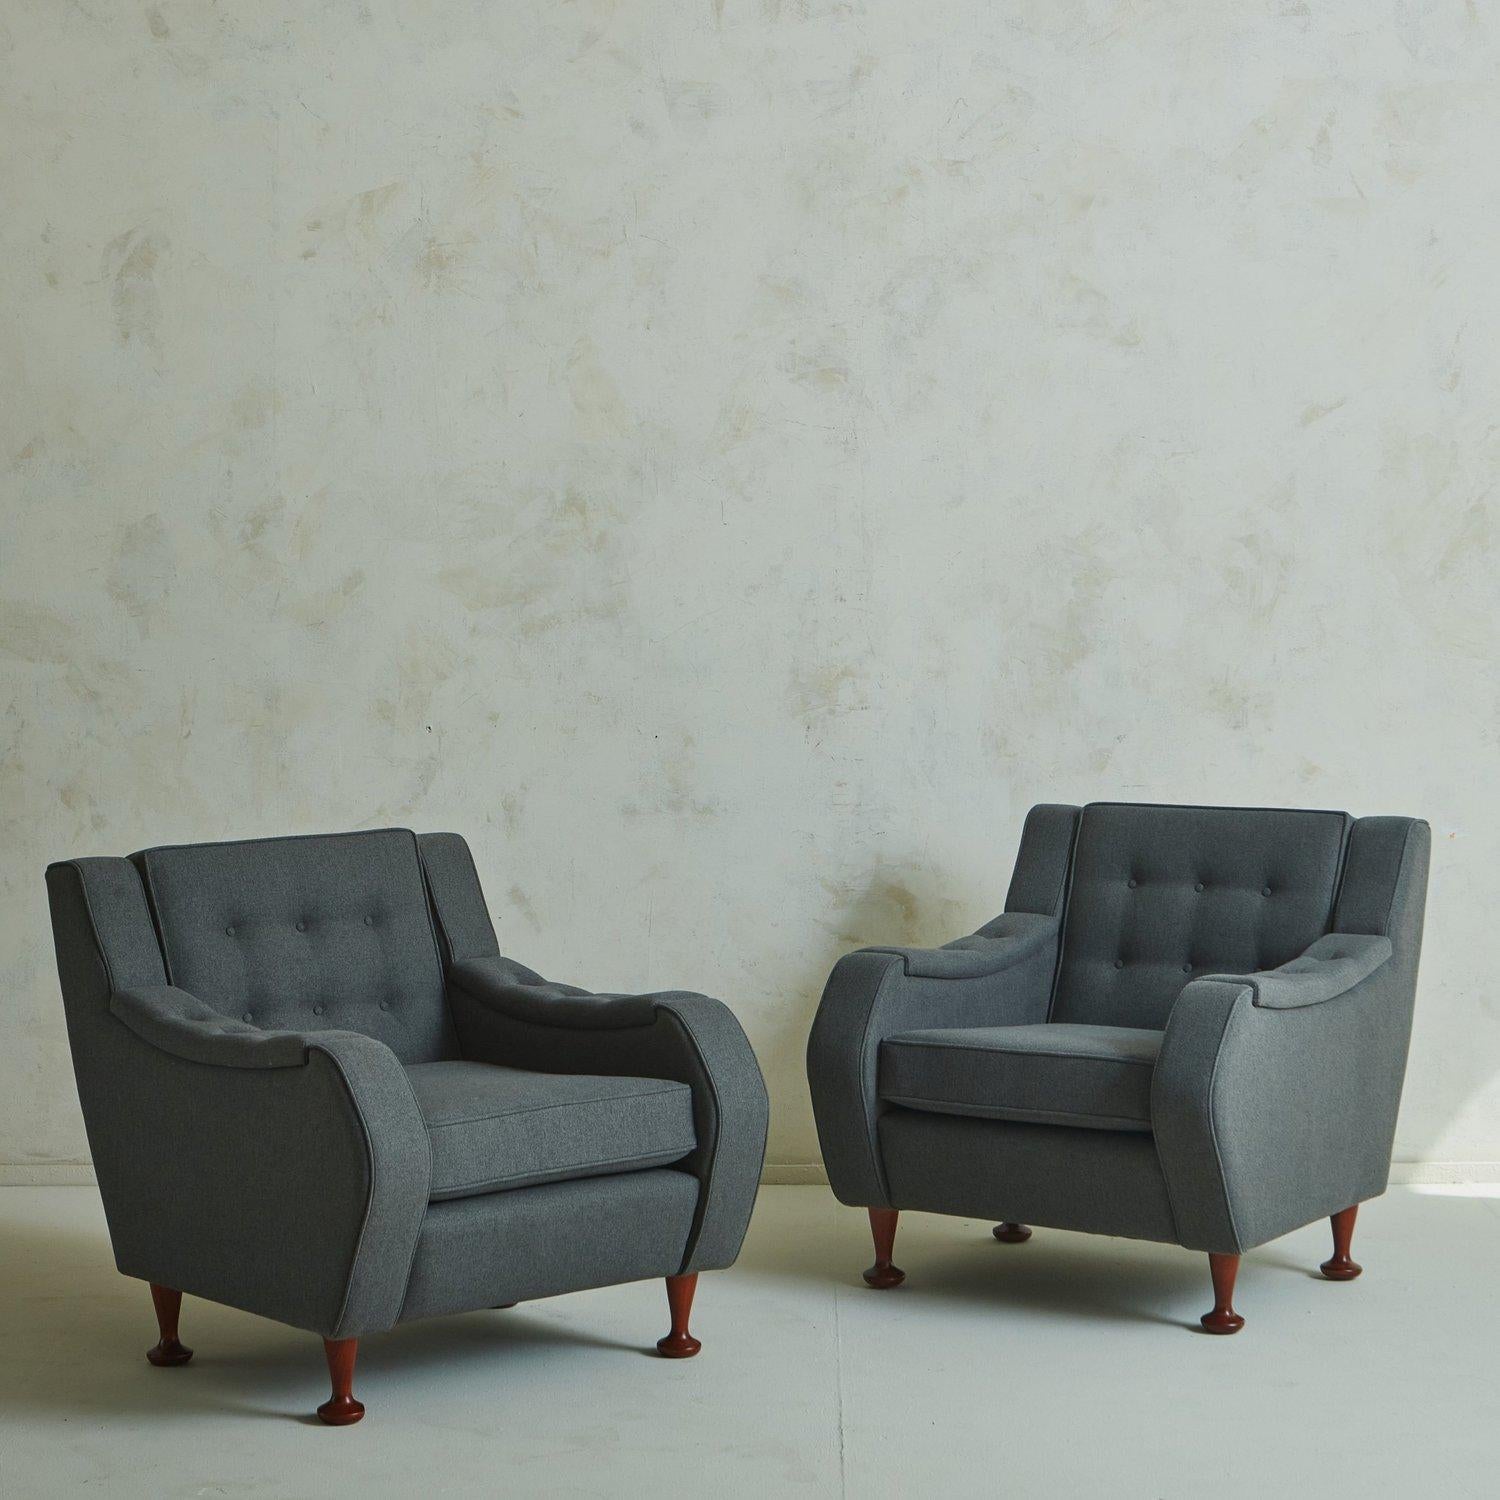 A pair of 1970s Italian lounge chairs in the style of Angelo Mangiarotti. These chairs were freshly reupholstered in an elegant gray wool with single welt detailing. Six button tufts adorn the seat back, which compliment three button tufts on each